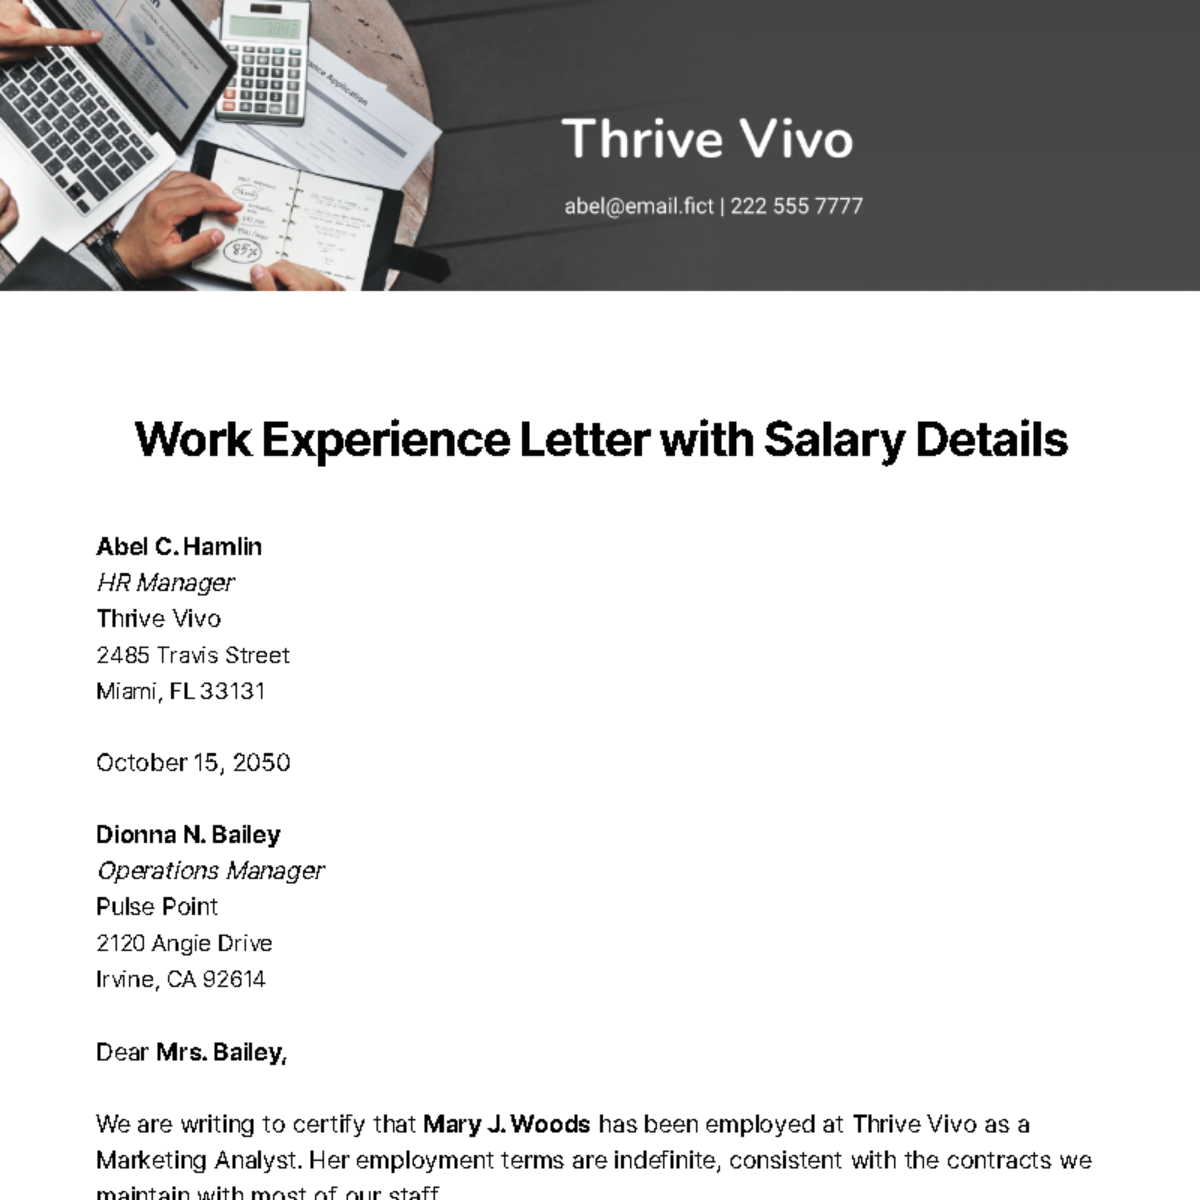 Work Experience Letter with Salary Details Template